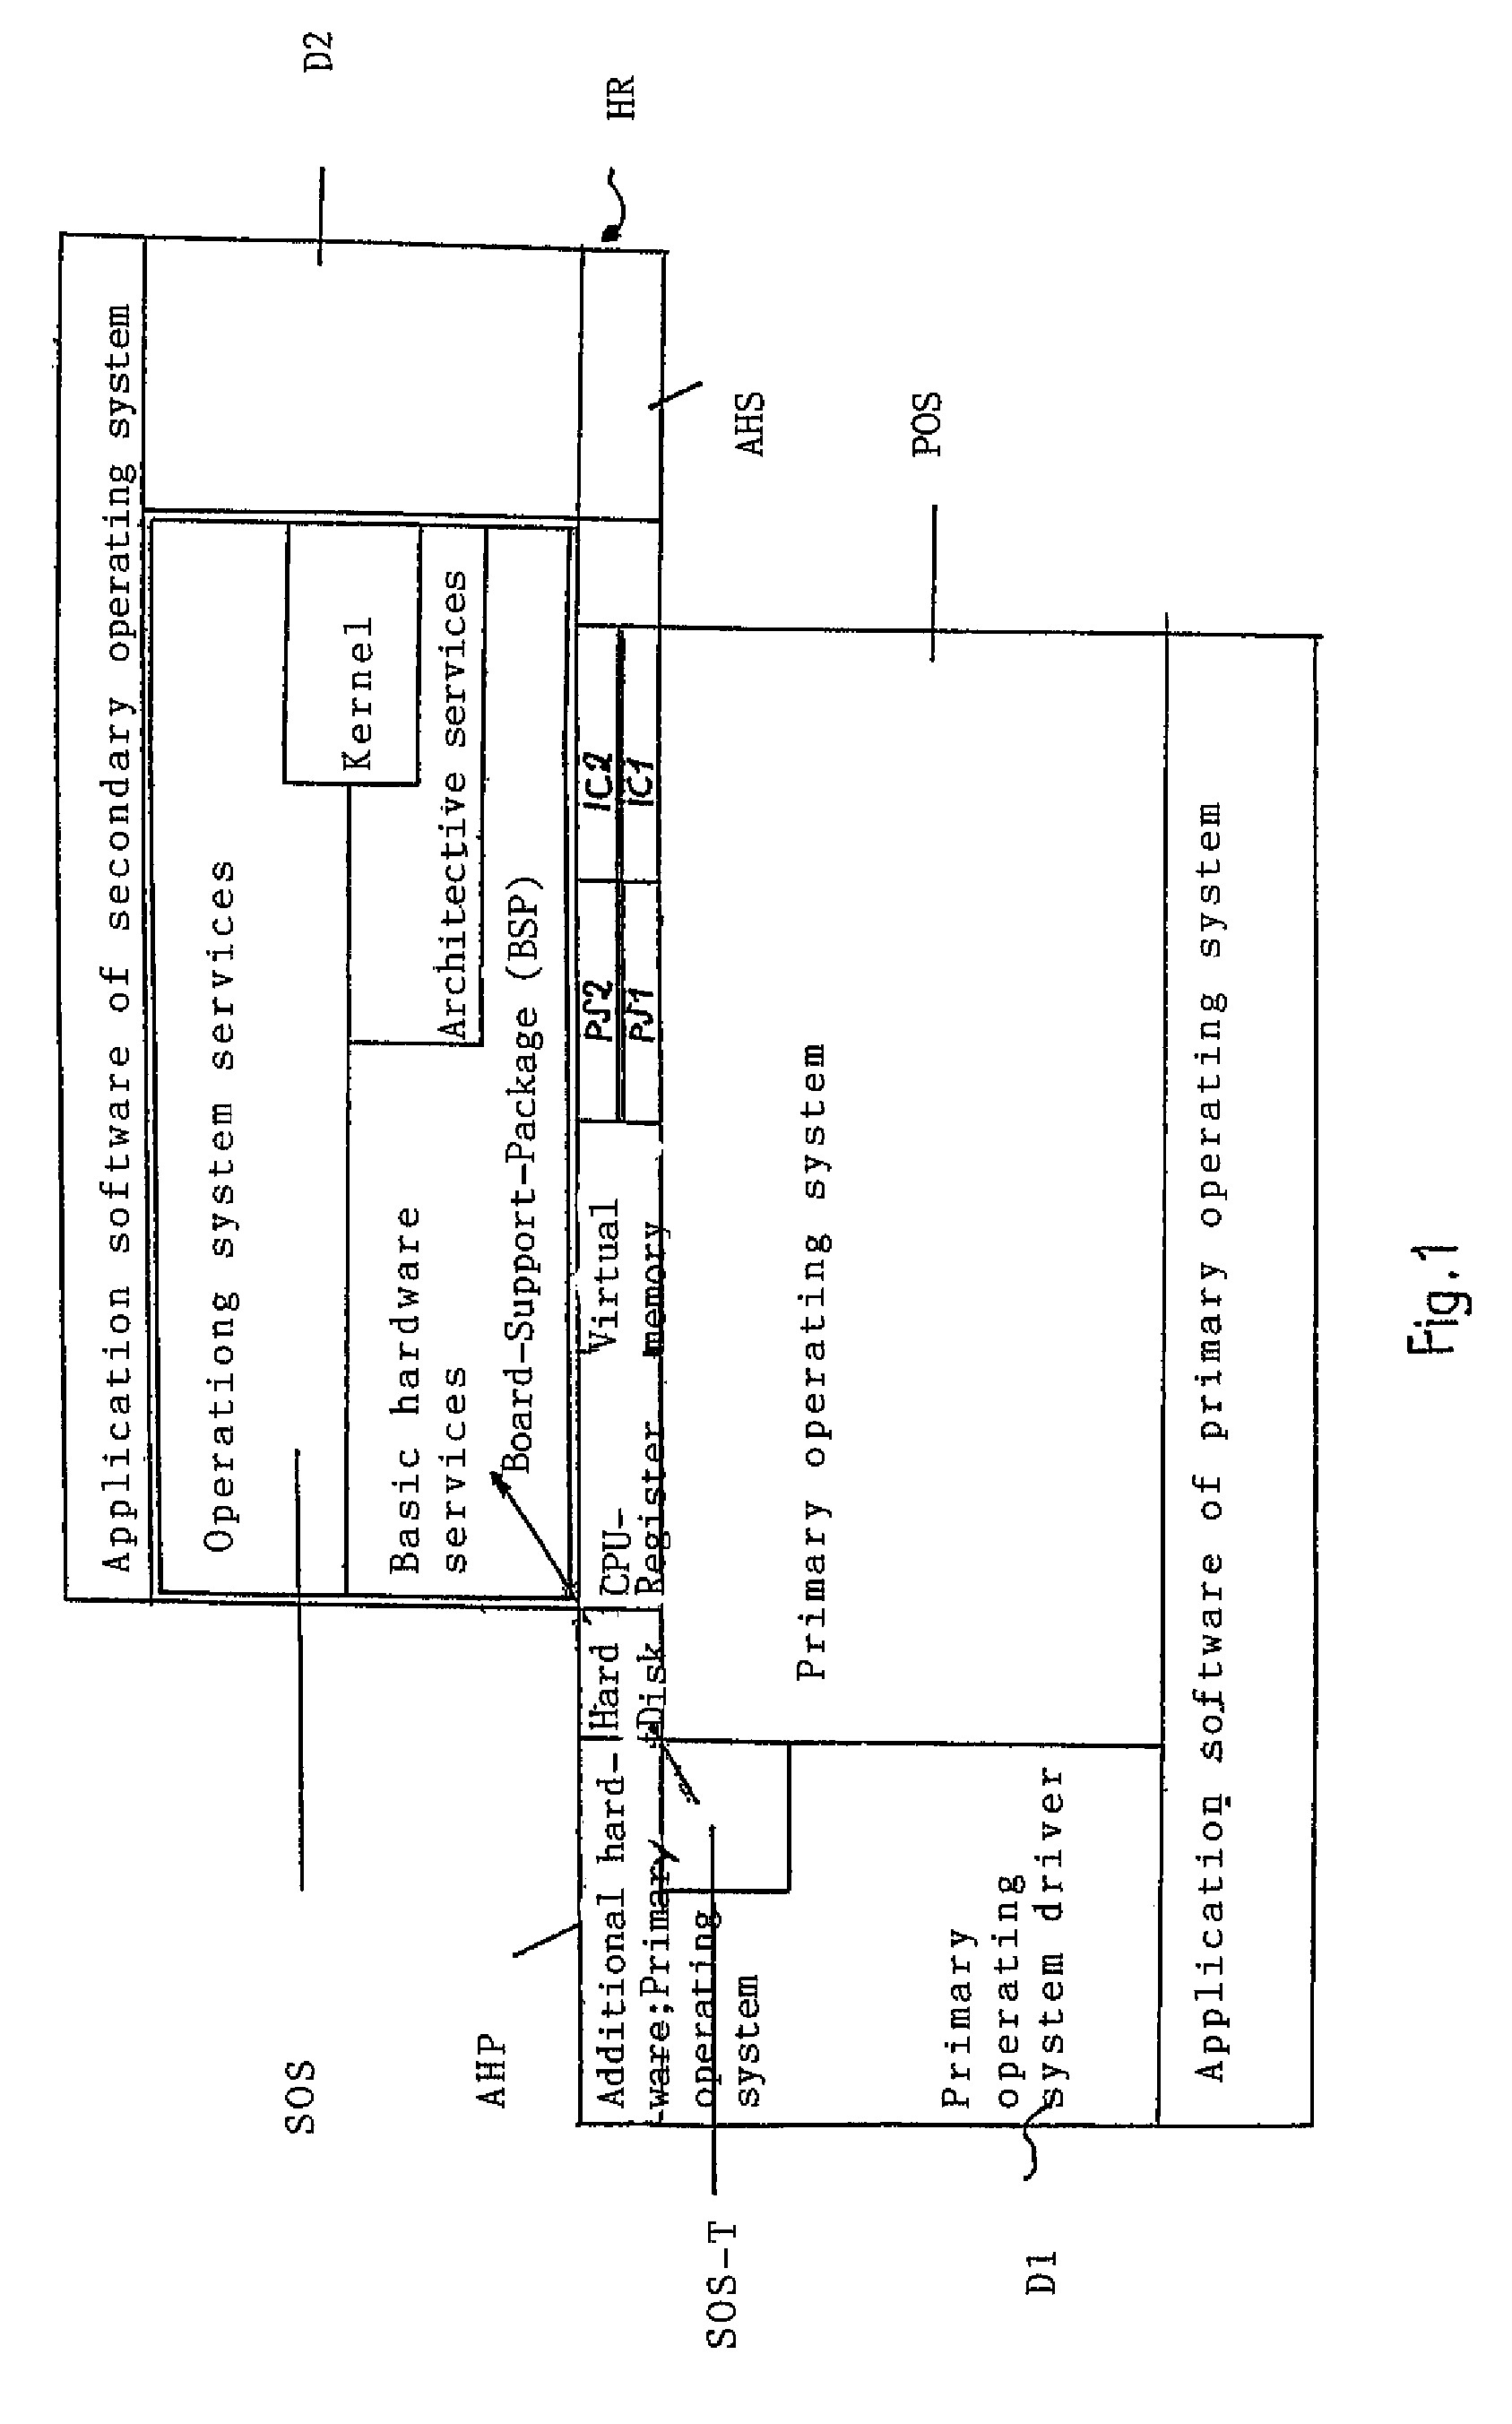 Method and device for operating a secondary operating system auxiliary to a primary operating system